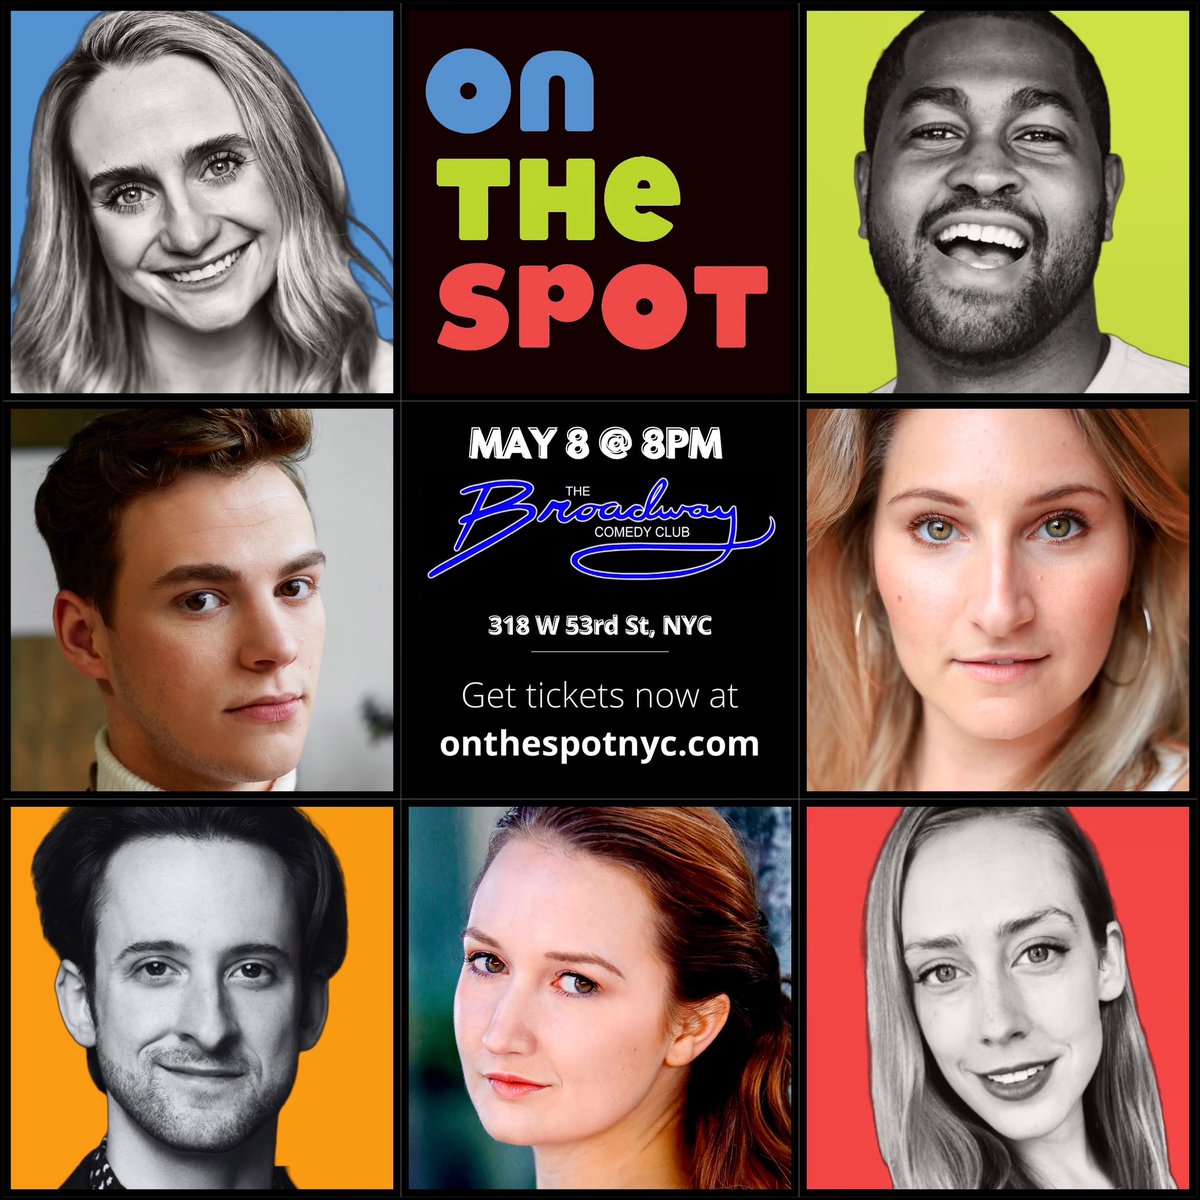 Come watch the next Tony-worthy musical come into existence before your very eyes at #OnTheSpotNYC tonight! 🤣🎶🎭✨

Buy Tickets at linktr.ee/onthespotnyc 🎫 🎟️ 🎫 🎟️ 🎫 🎟️ 

#Cabaret #Comedy #Improv #ImprovComedy #MusicalImprov